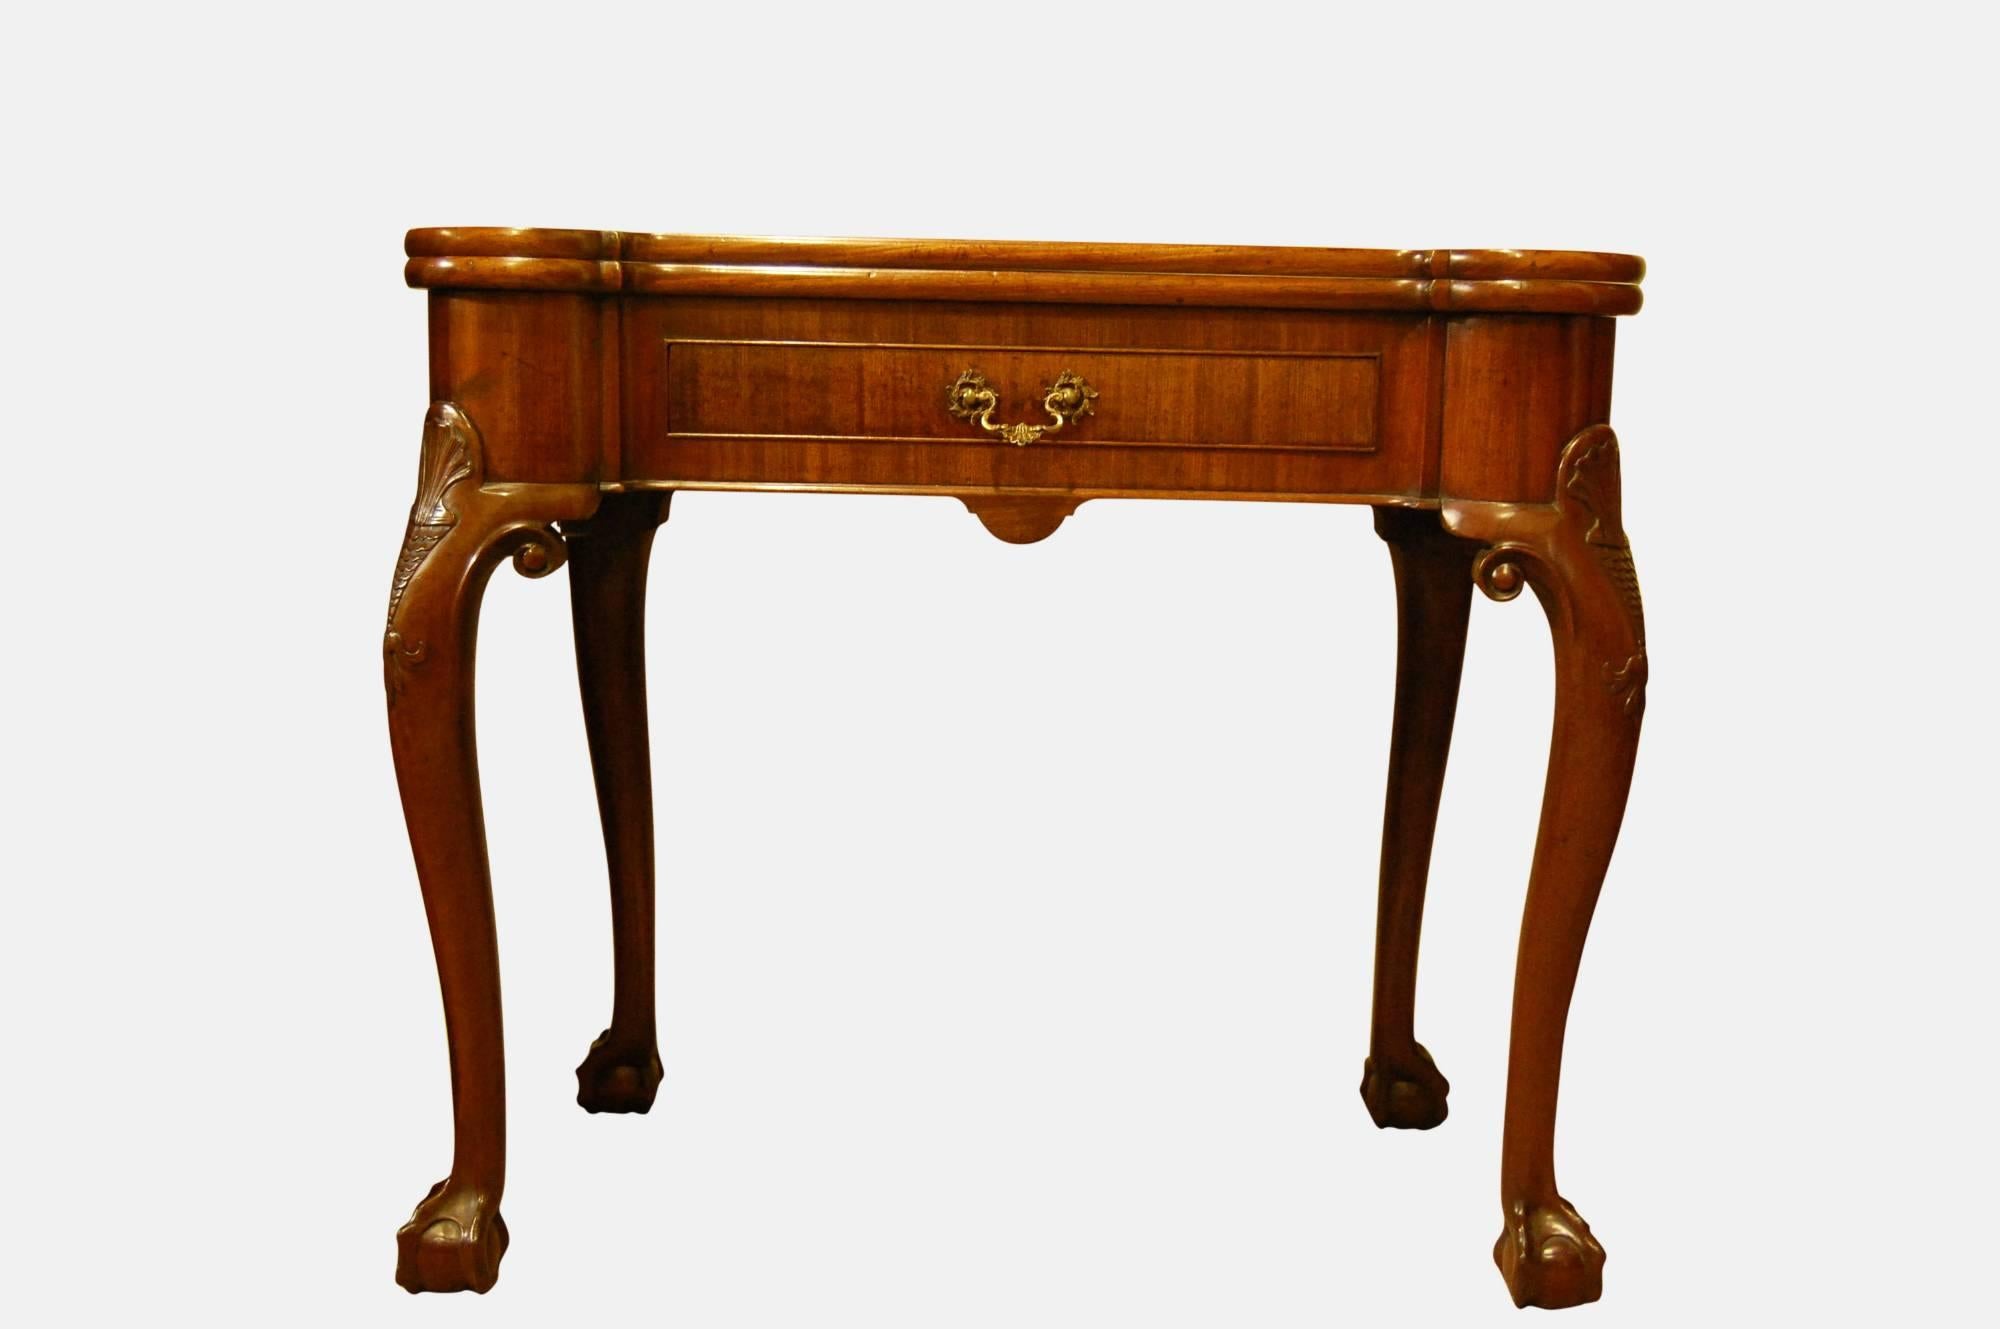 George III Irish mahogany foldover table

Turret corners, centre frieze drawer 

Cabriole legs hipped and carved with fish scale above pendant bell flowers

Ball and claw feet.
 